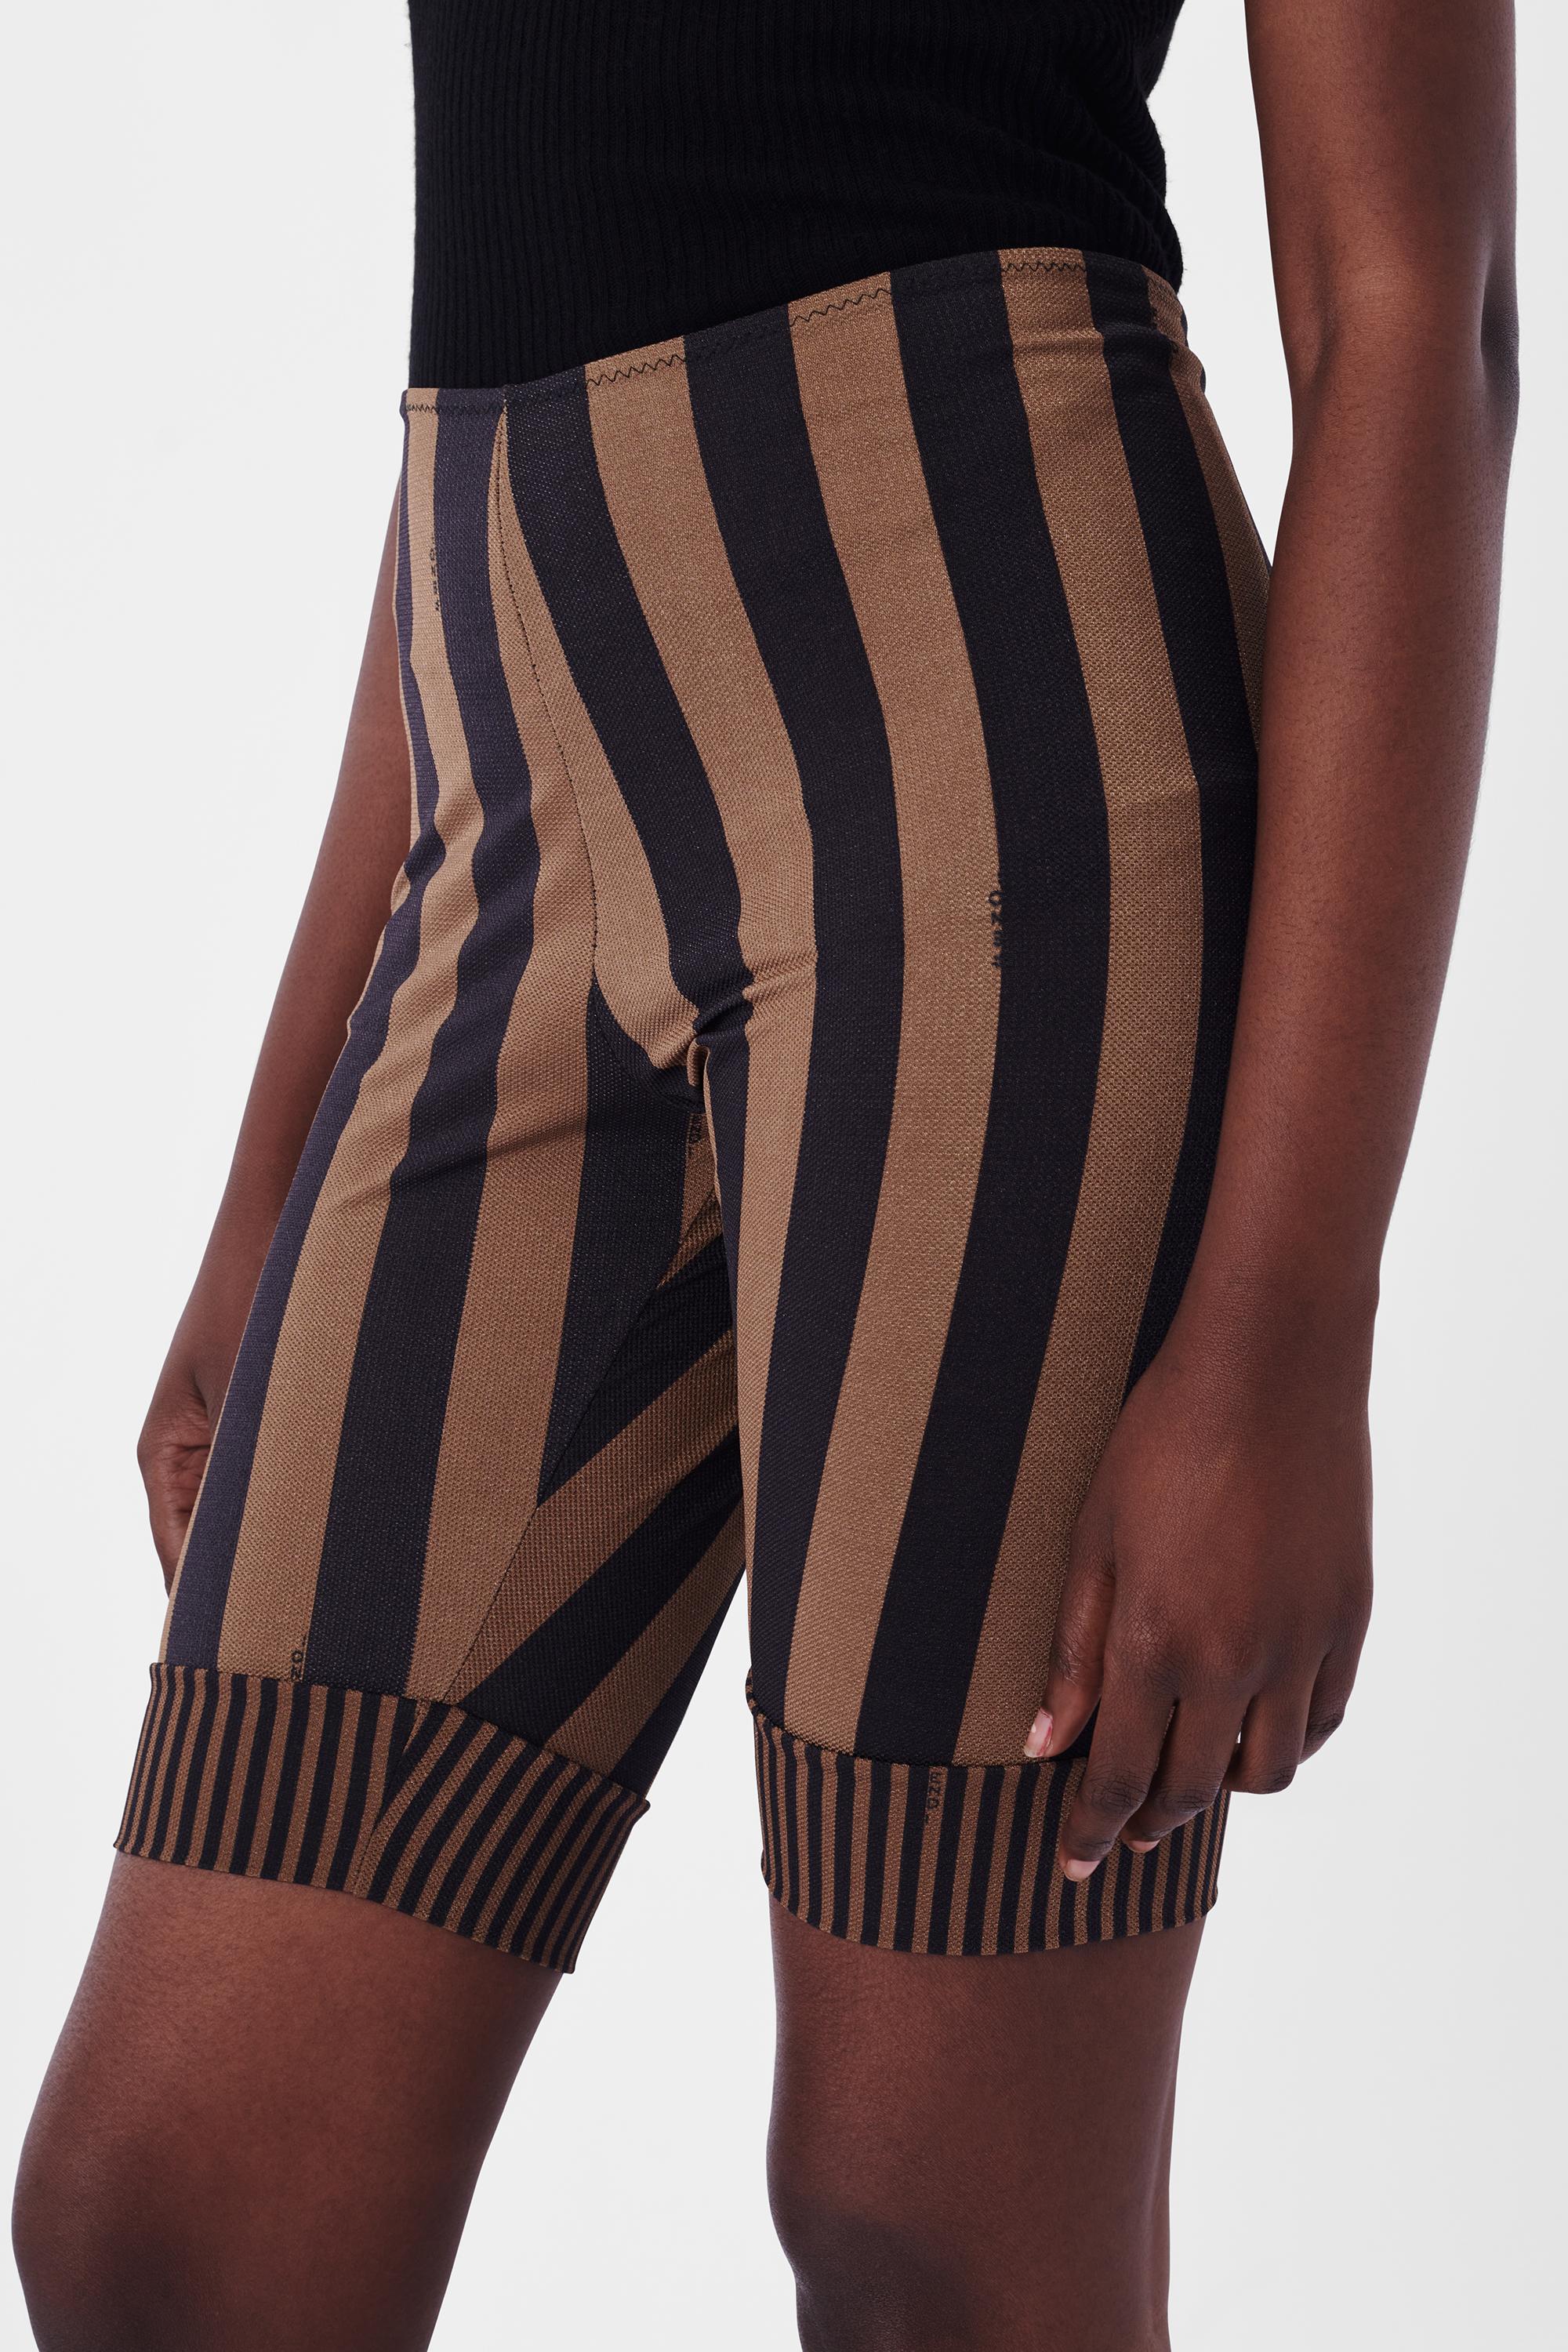 We are excited to present this Fendi Vintage Striped Cycling Shorts. Features mid rise and black and brown large stripes on top with smaller stripes on hem. In excellent vintage condition. Authenticity guaranteed.

Label size: Medium
Modern size: UK